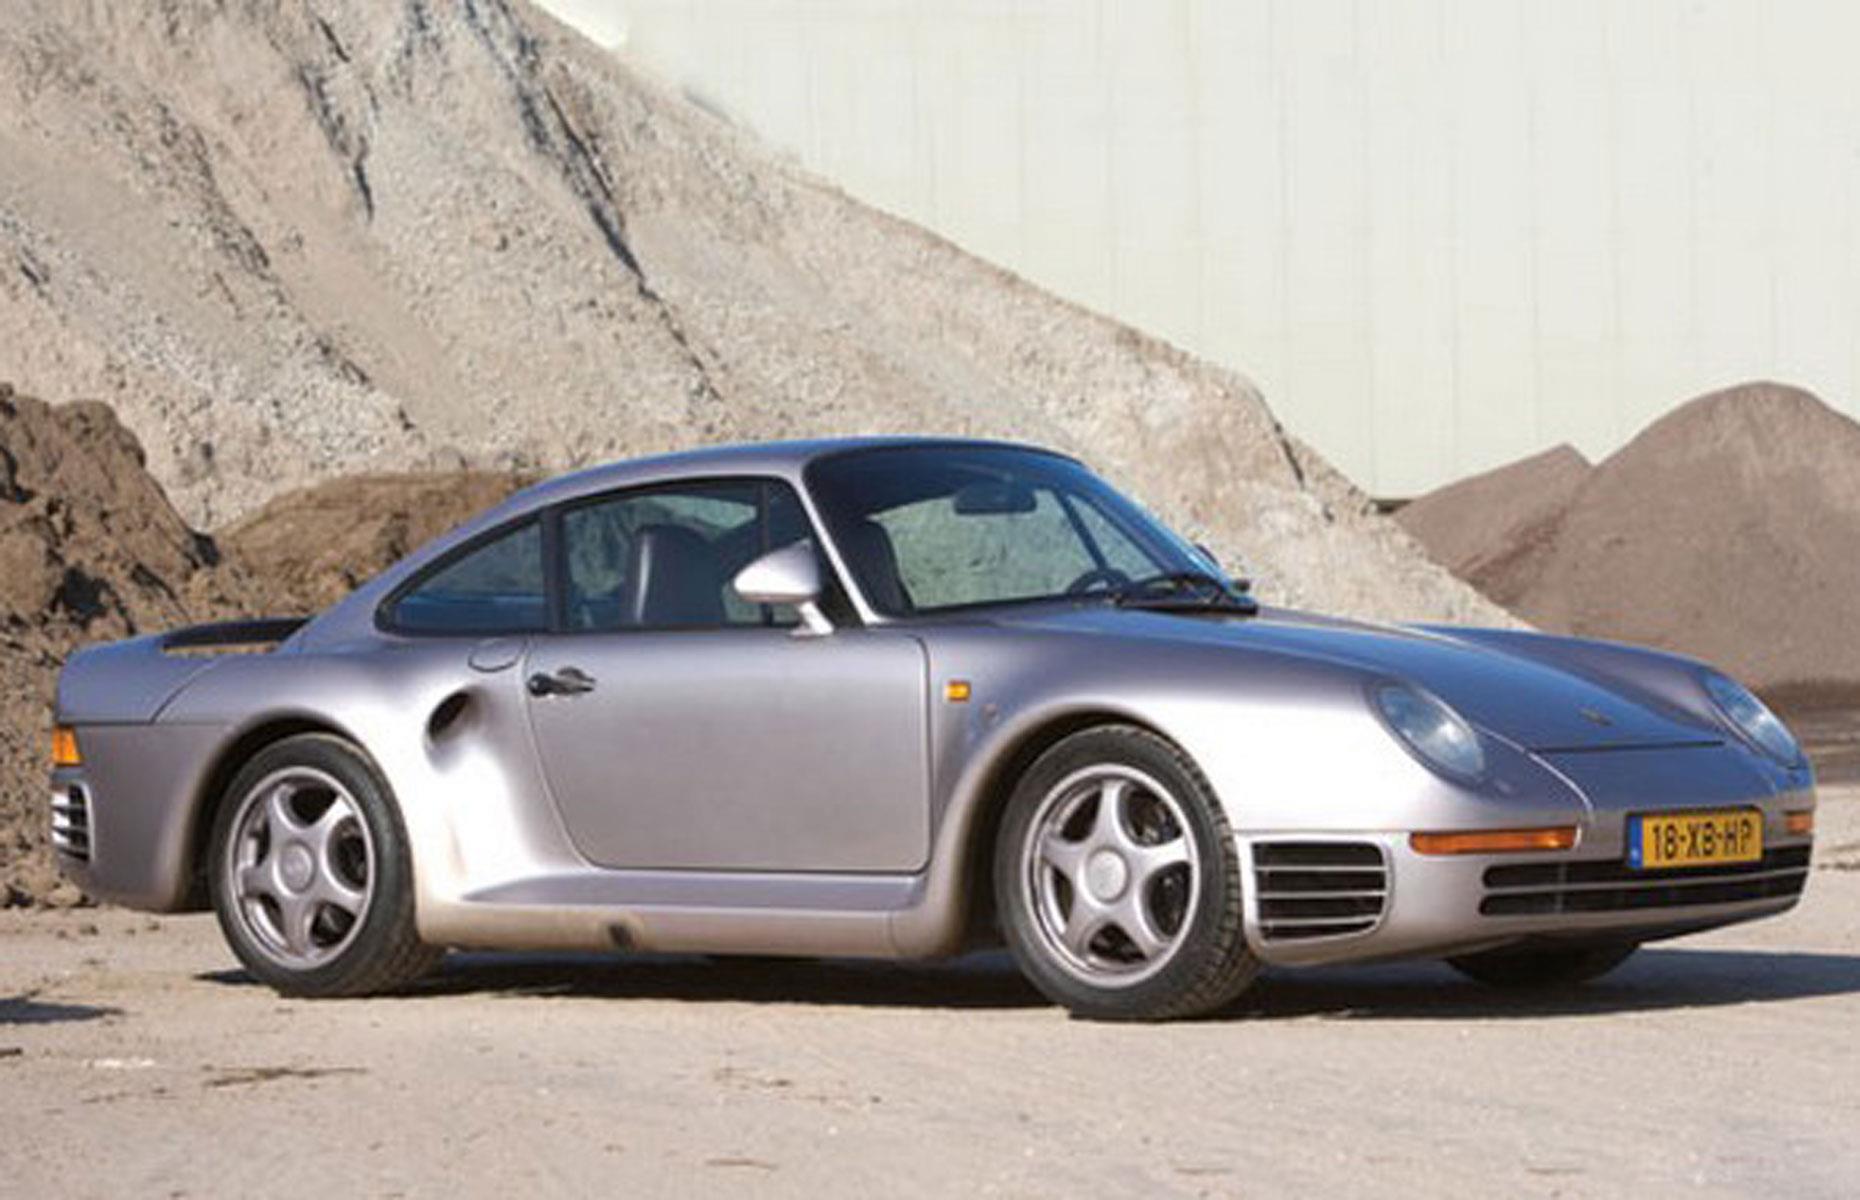 <p>Along with his private jet, Bill Gates has a penchant for Porsche supercars, which he considers his other rare indulgence. The major philanthropist bought his first Porsche, a 911 Turbo, in 1979, and then went on to purchase a rare 959 in 1987. Now worth up to $2 million (£1.4m), the supercar was impounded by US customs for 13 years and Gates, who recently acquired an electric Porsche Taycan, actually helped pass a law to make the model road-legal. </p>